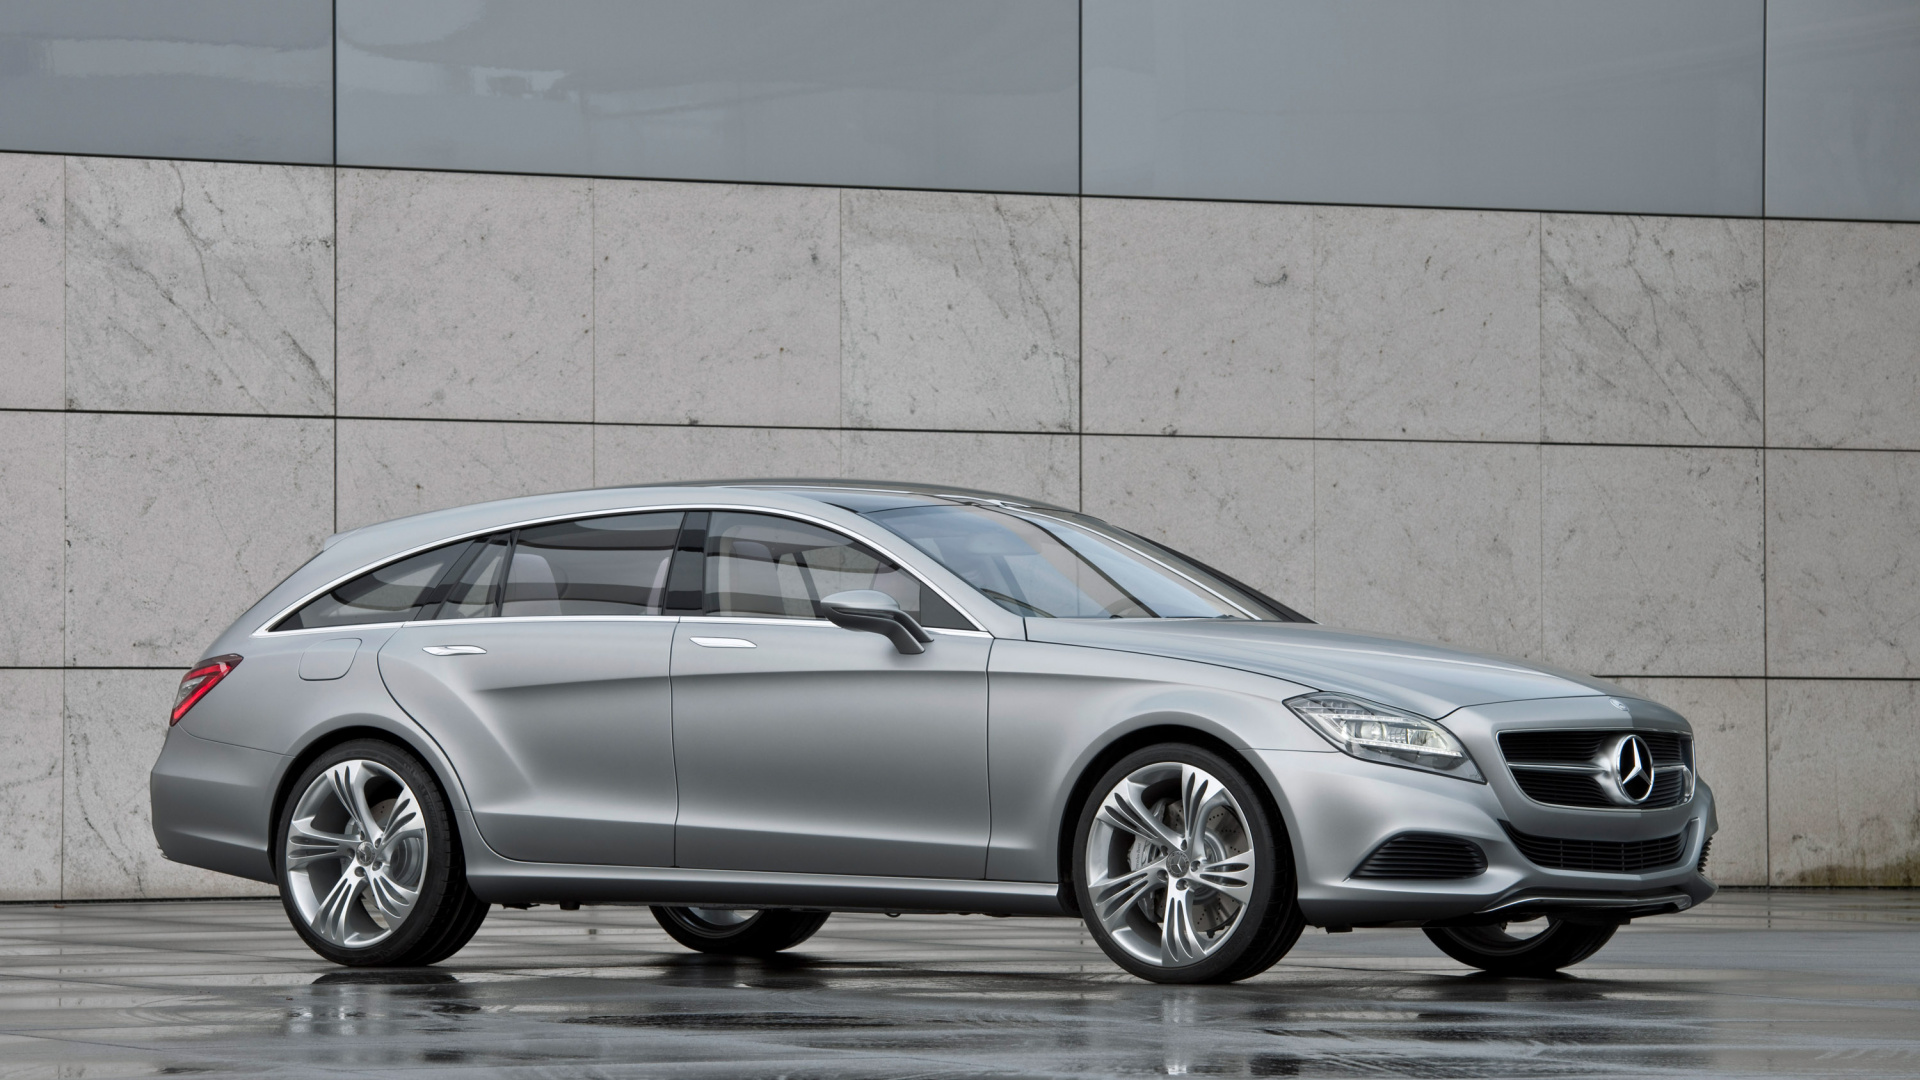 Silver Mercedes Benz Coupe Parked Beside Brown Wall. Wallpaper in 1920x1080 Resolution